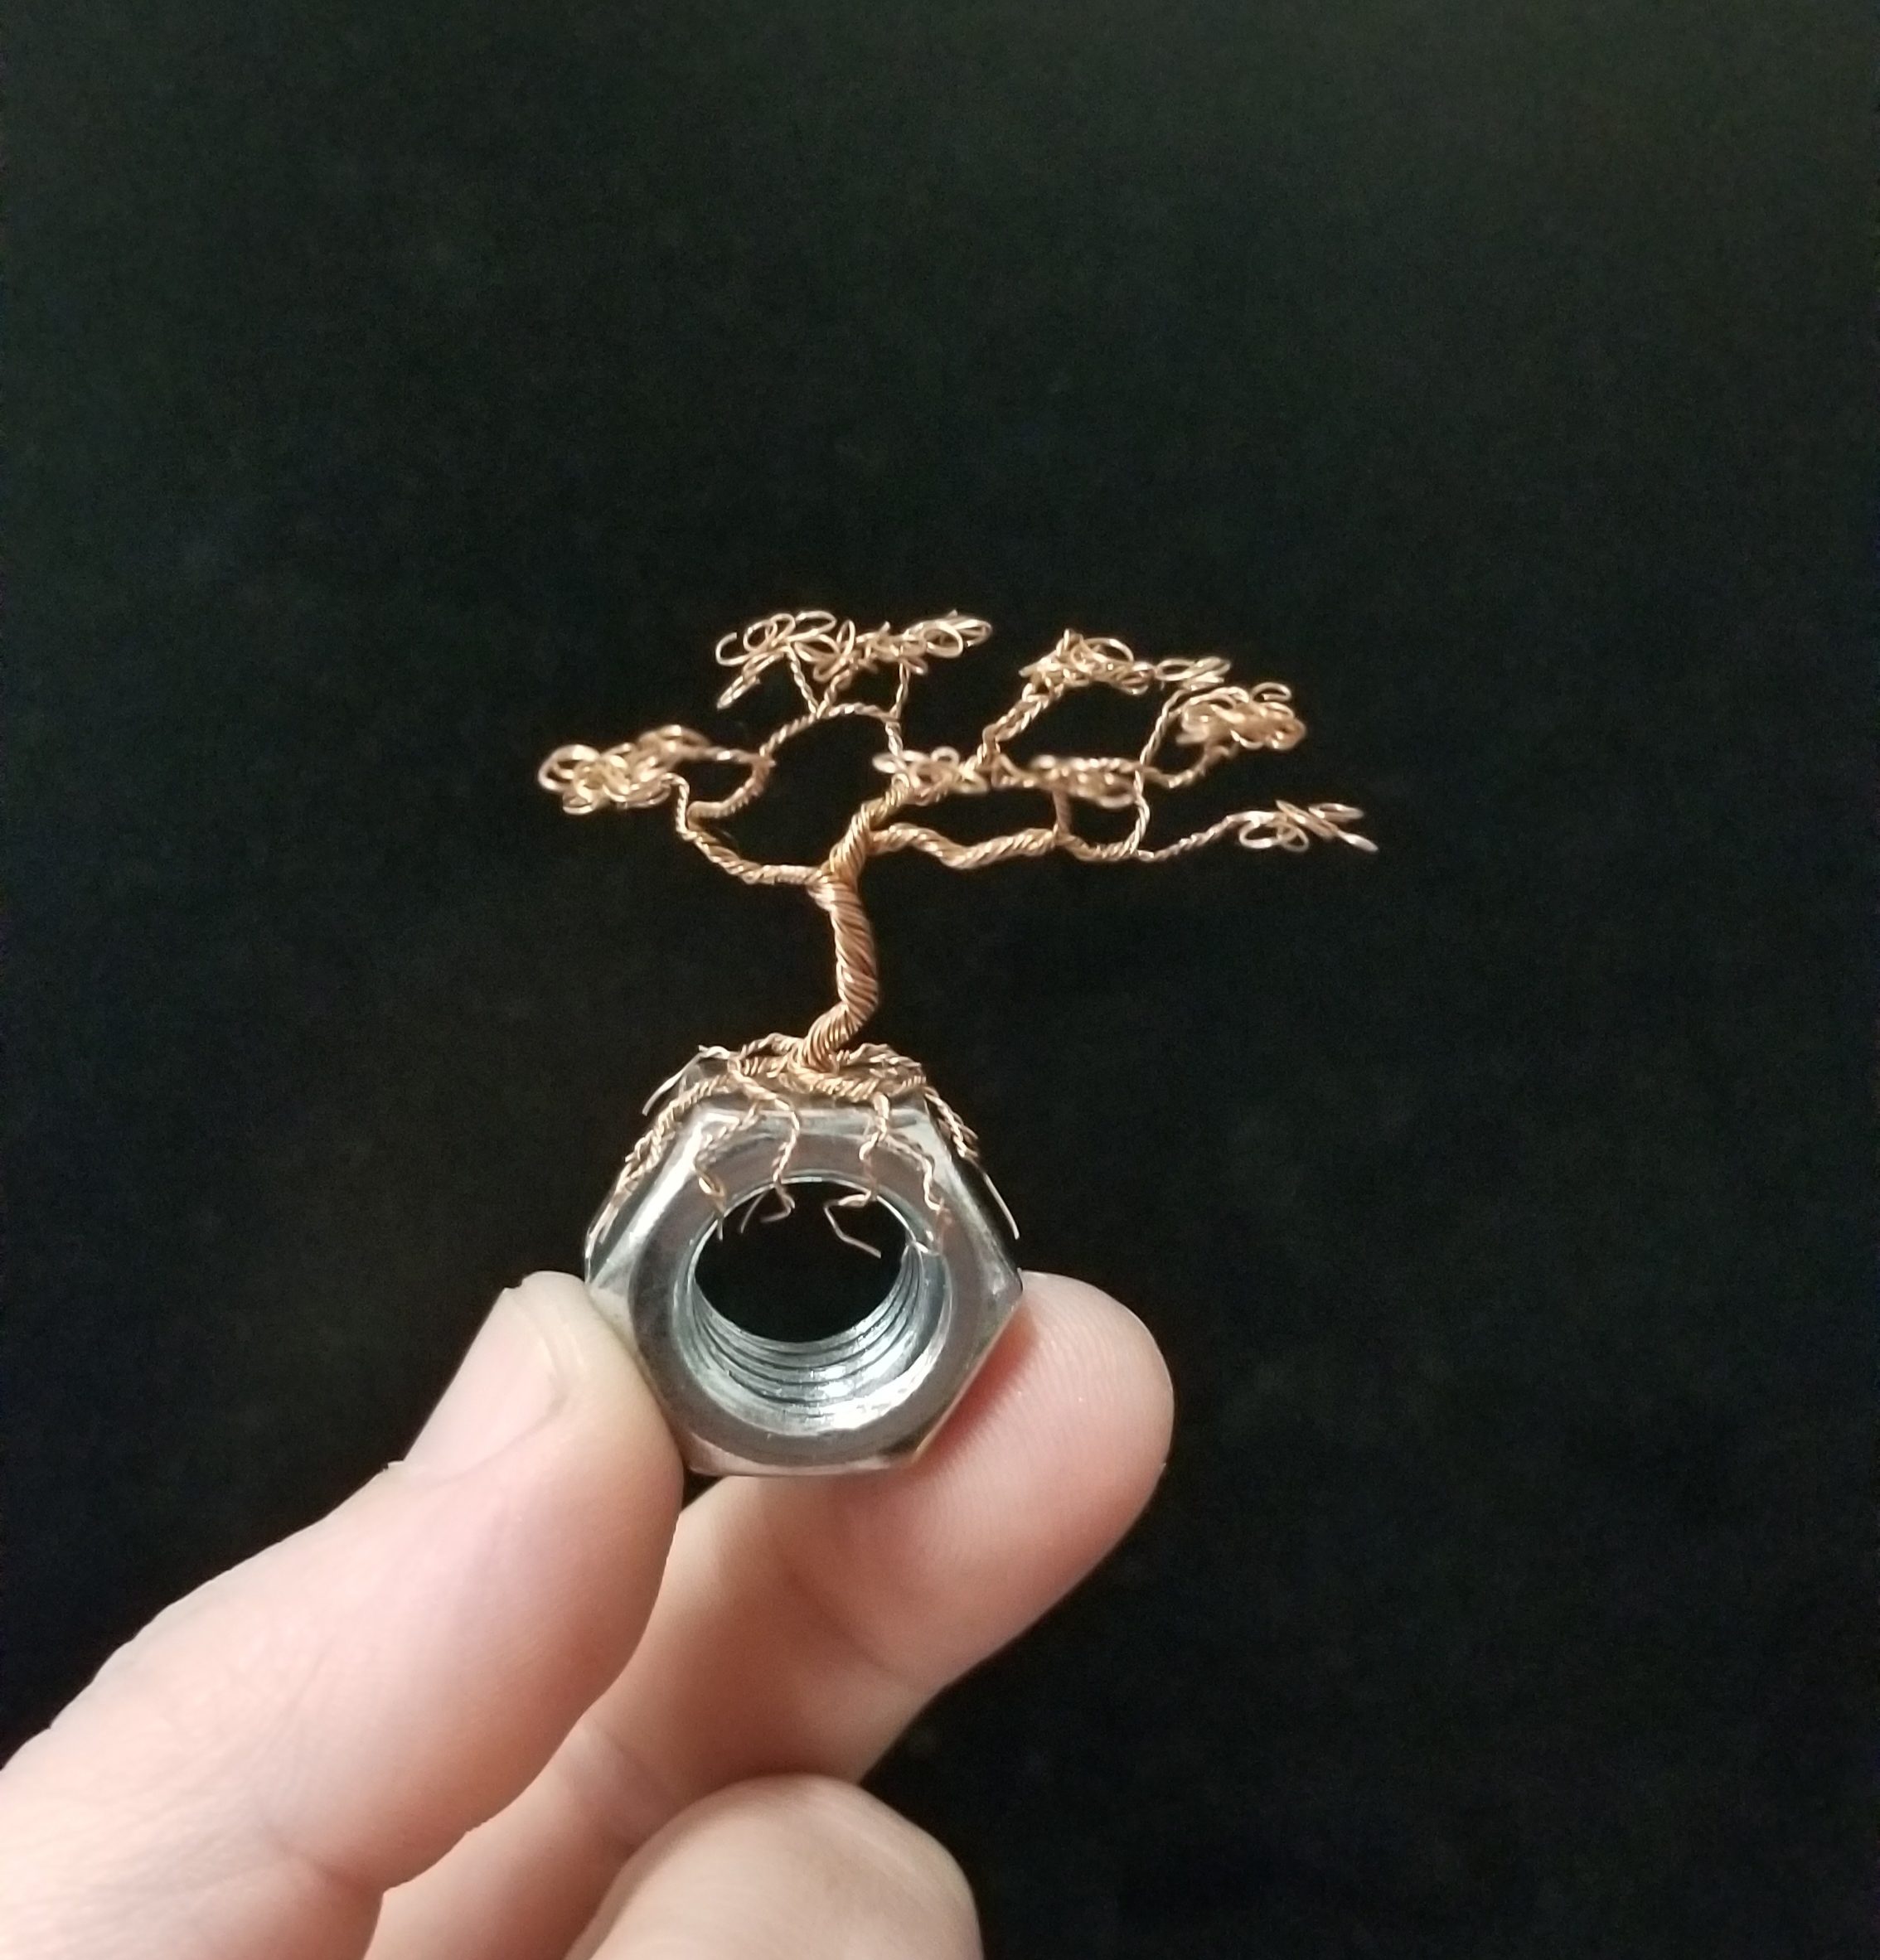 Wire Trees with Amanda Tinker